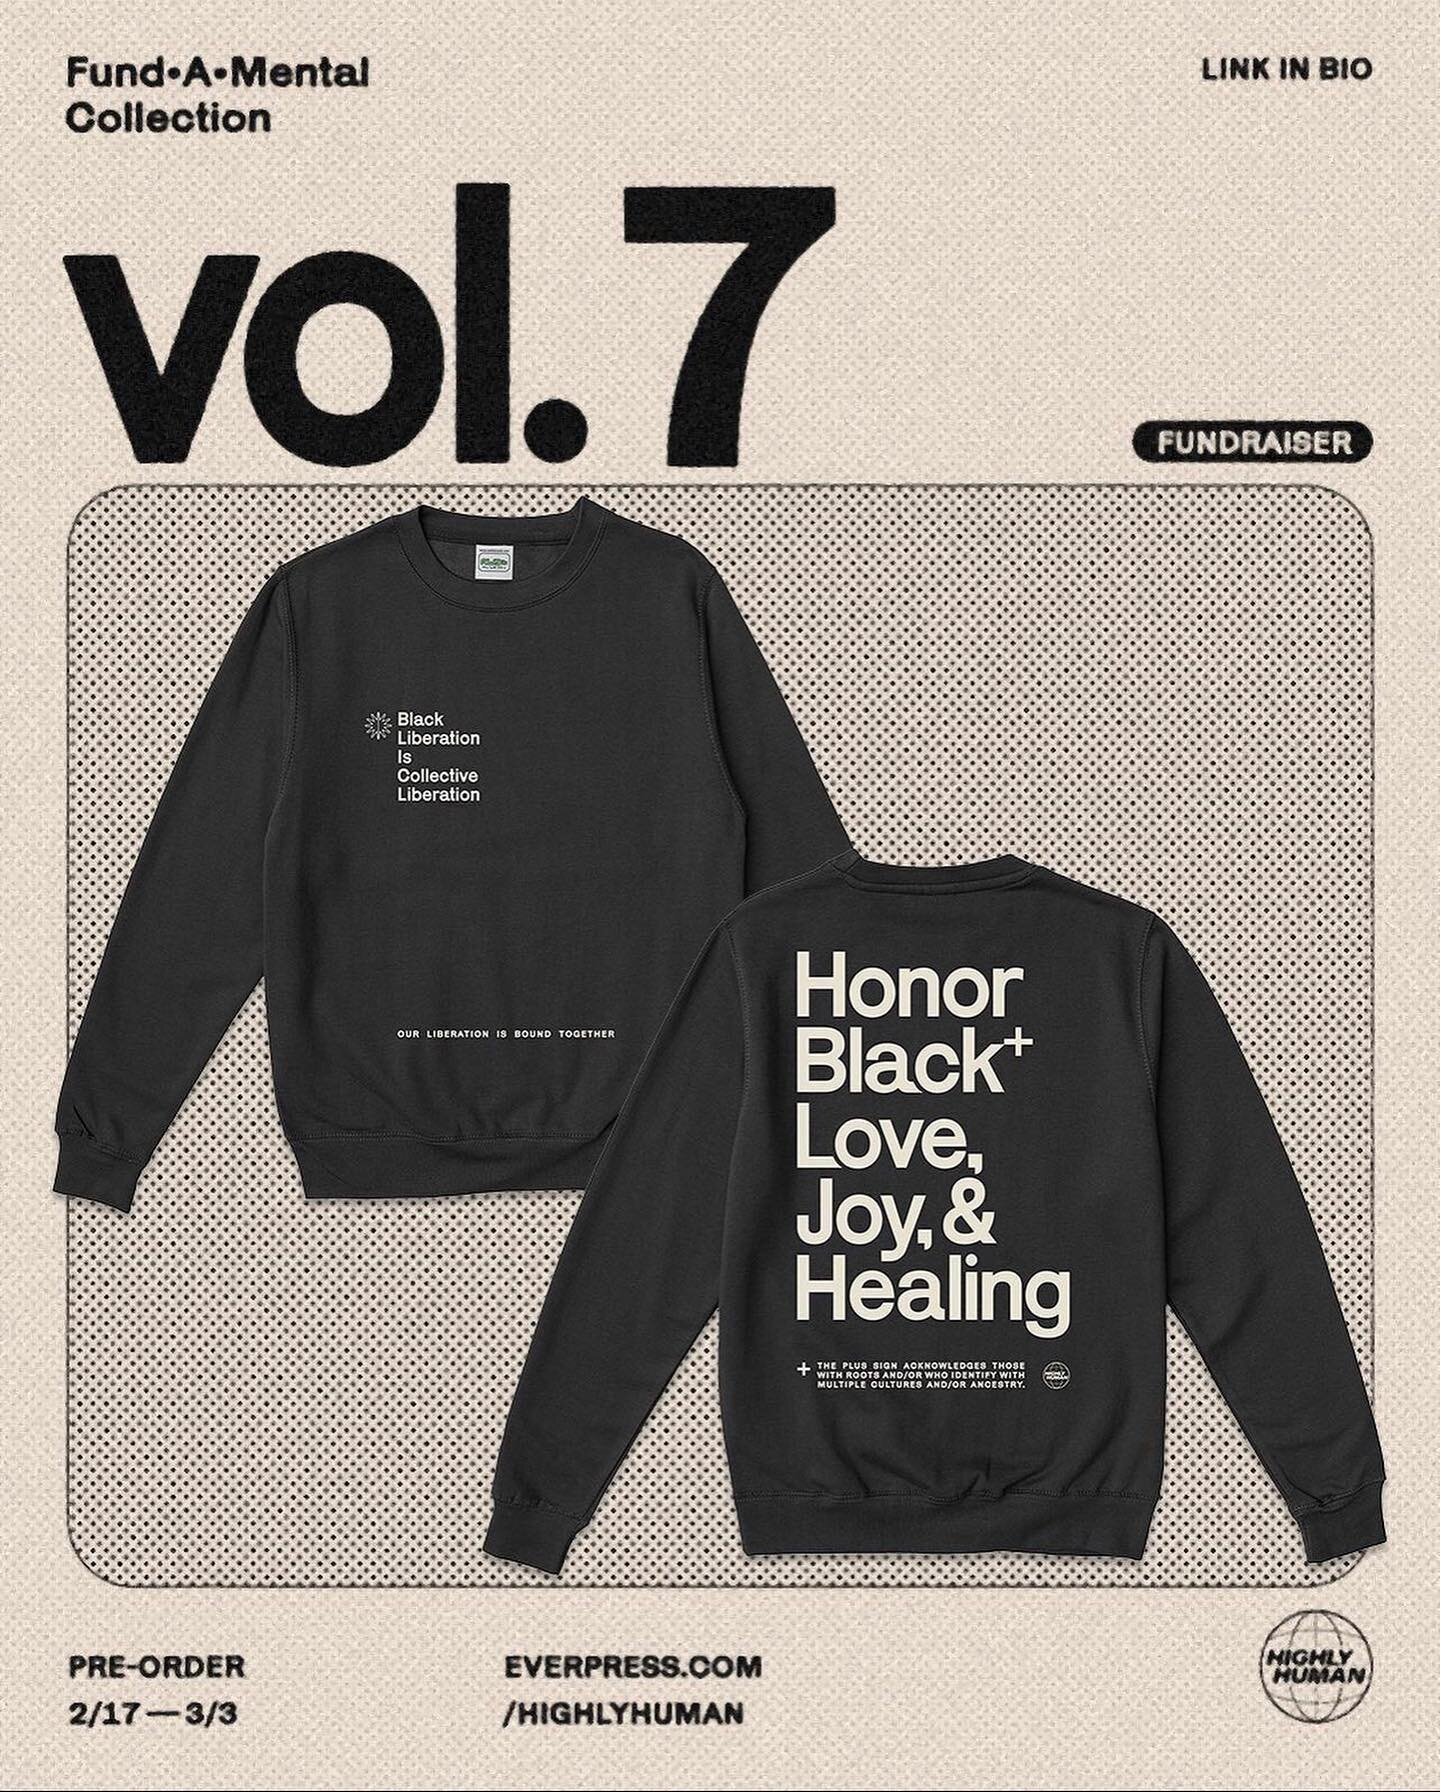 Our dear friend @highlyhuman launched a new collection on @everpresshq with a design celebrating Black+ Love, Joy, and Healing. 100% of funds raised will be split between SHEER and two other black led organizations: The Floret Coalition &amp; @blasia